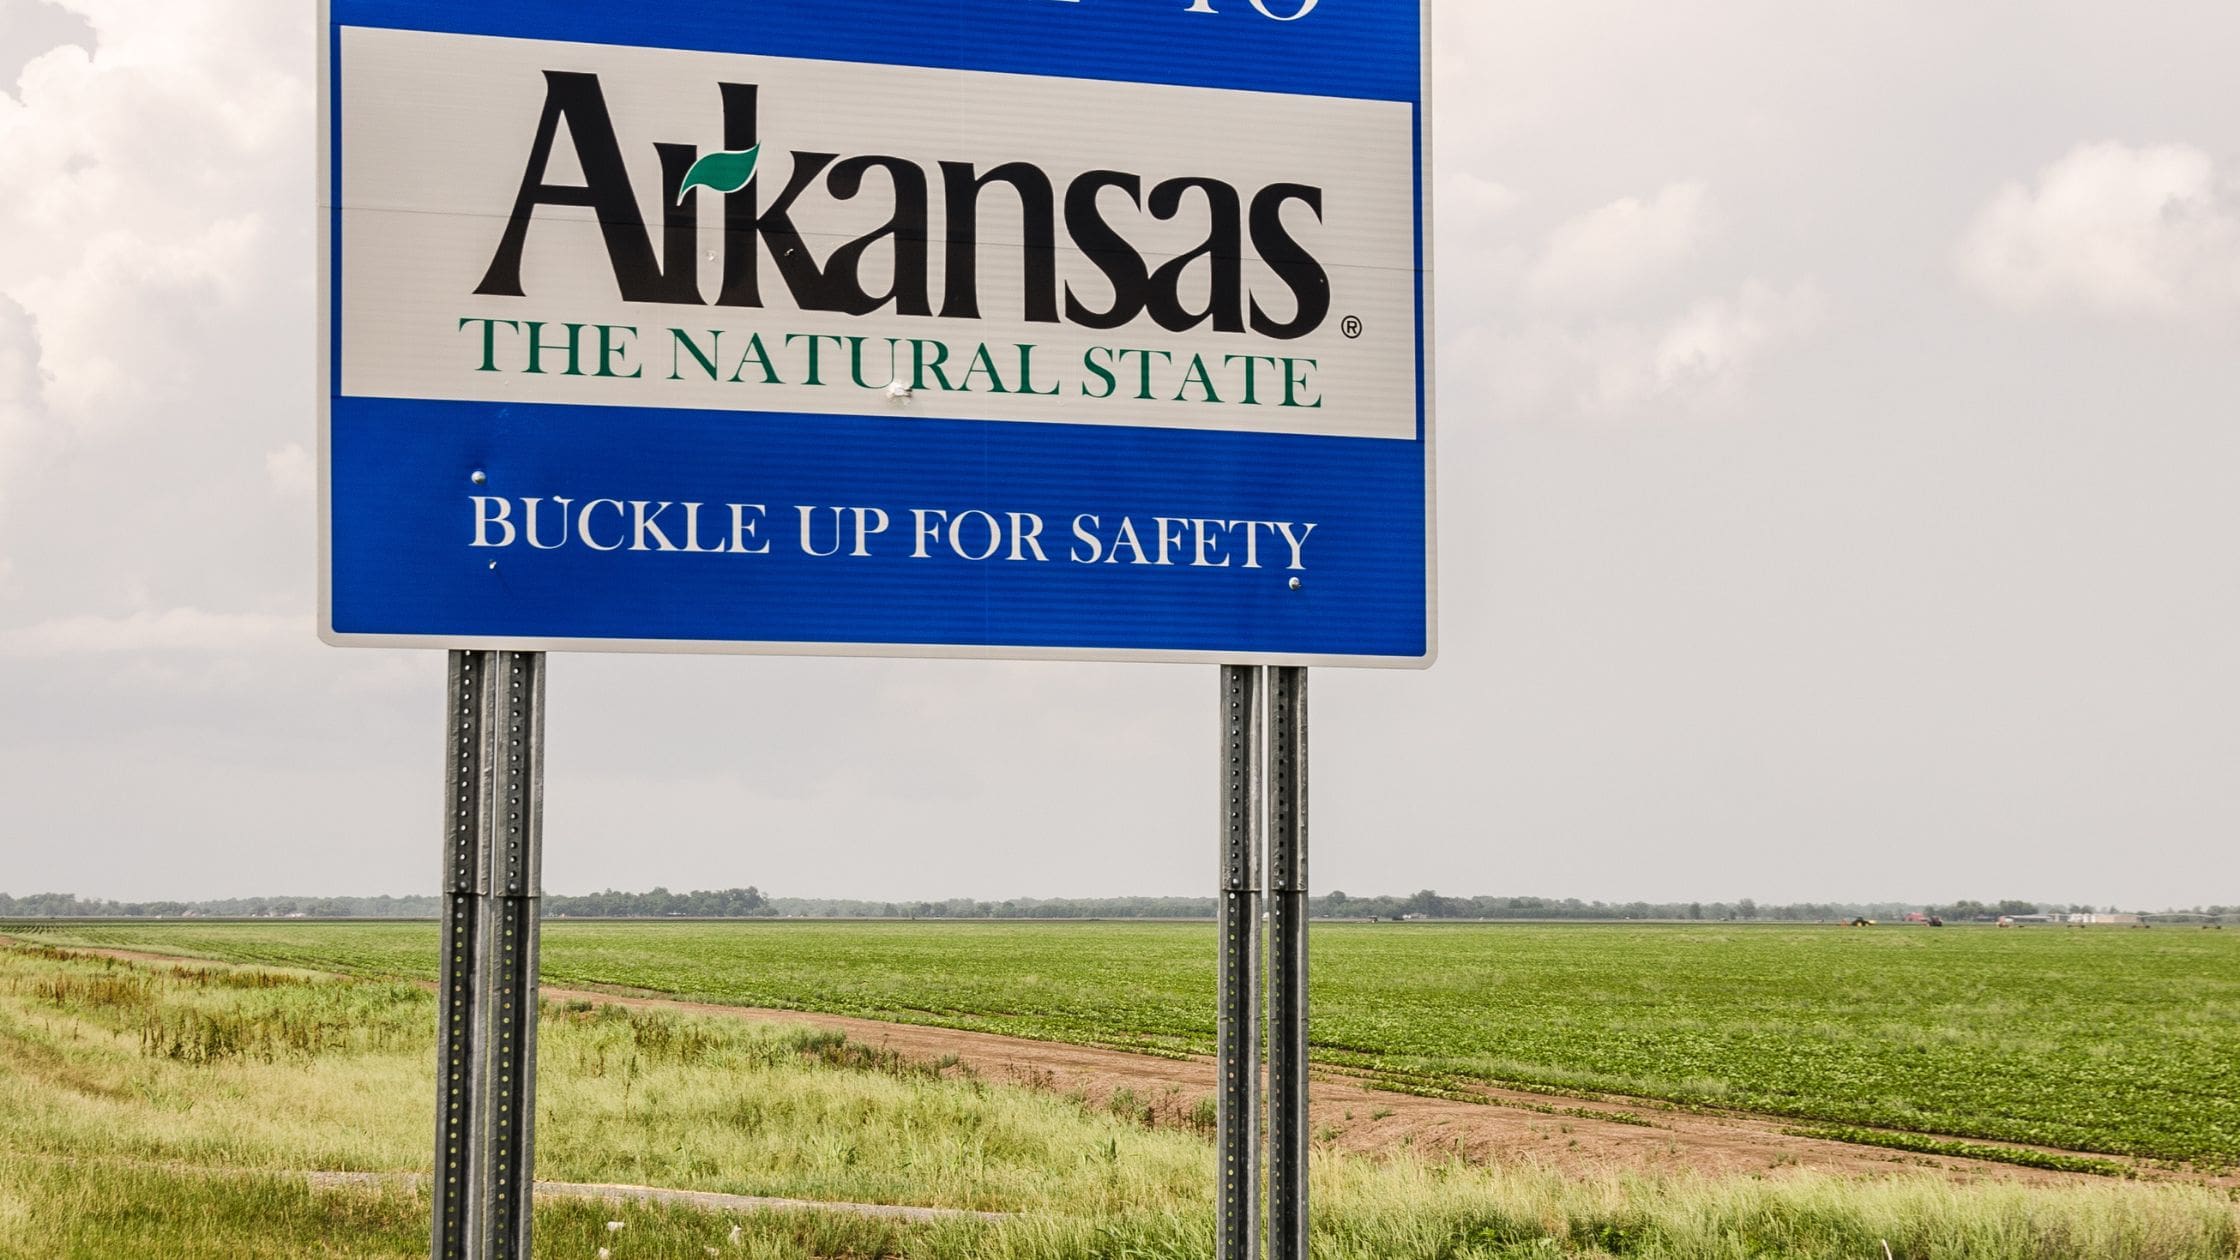 Arkansas Mineral Rights: Oil Fields, Laws & Ownership